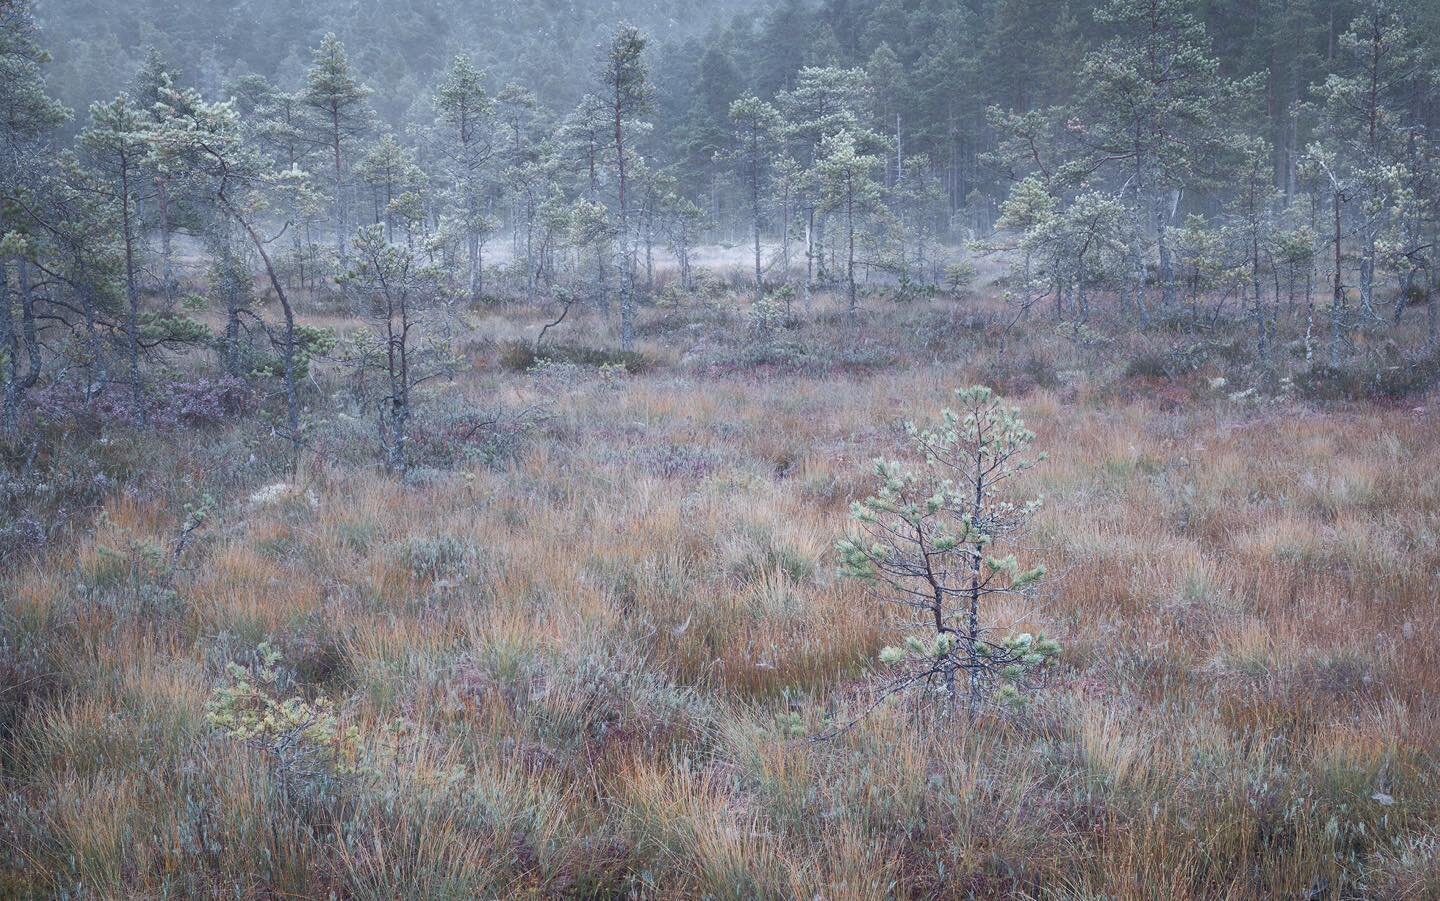 There is hardly a moment when nature doesn&rsquo;t surprise me, gives me joy and peace of mind. On the first morning out on the bog the sun broke out and gave us that early morning glow. The next morning was damp and soft. The colours more intense. I